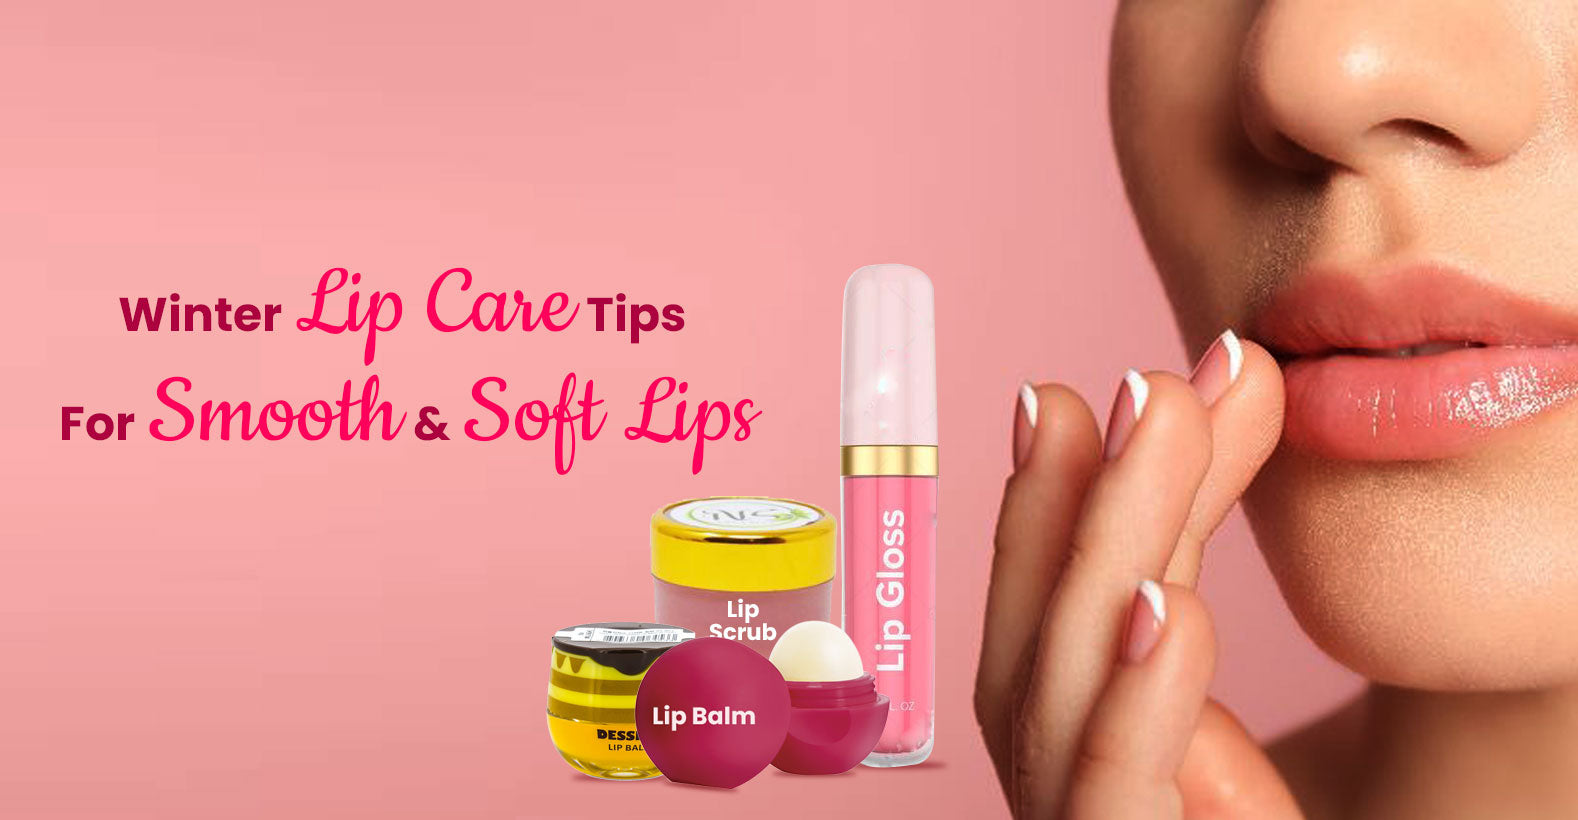 Say Goodbye to Winter Lip Woes!